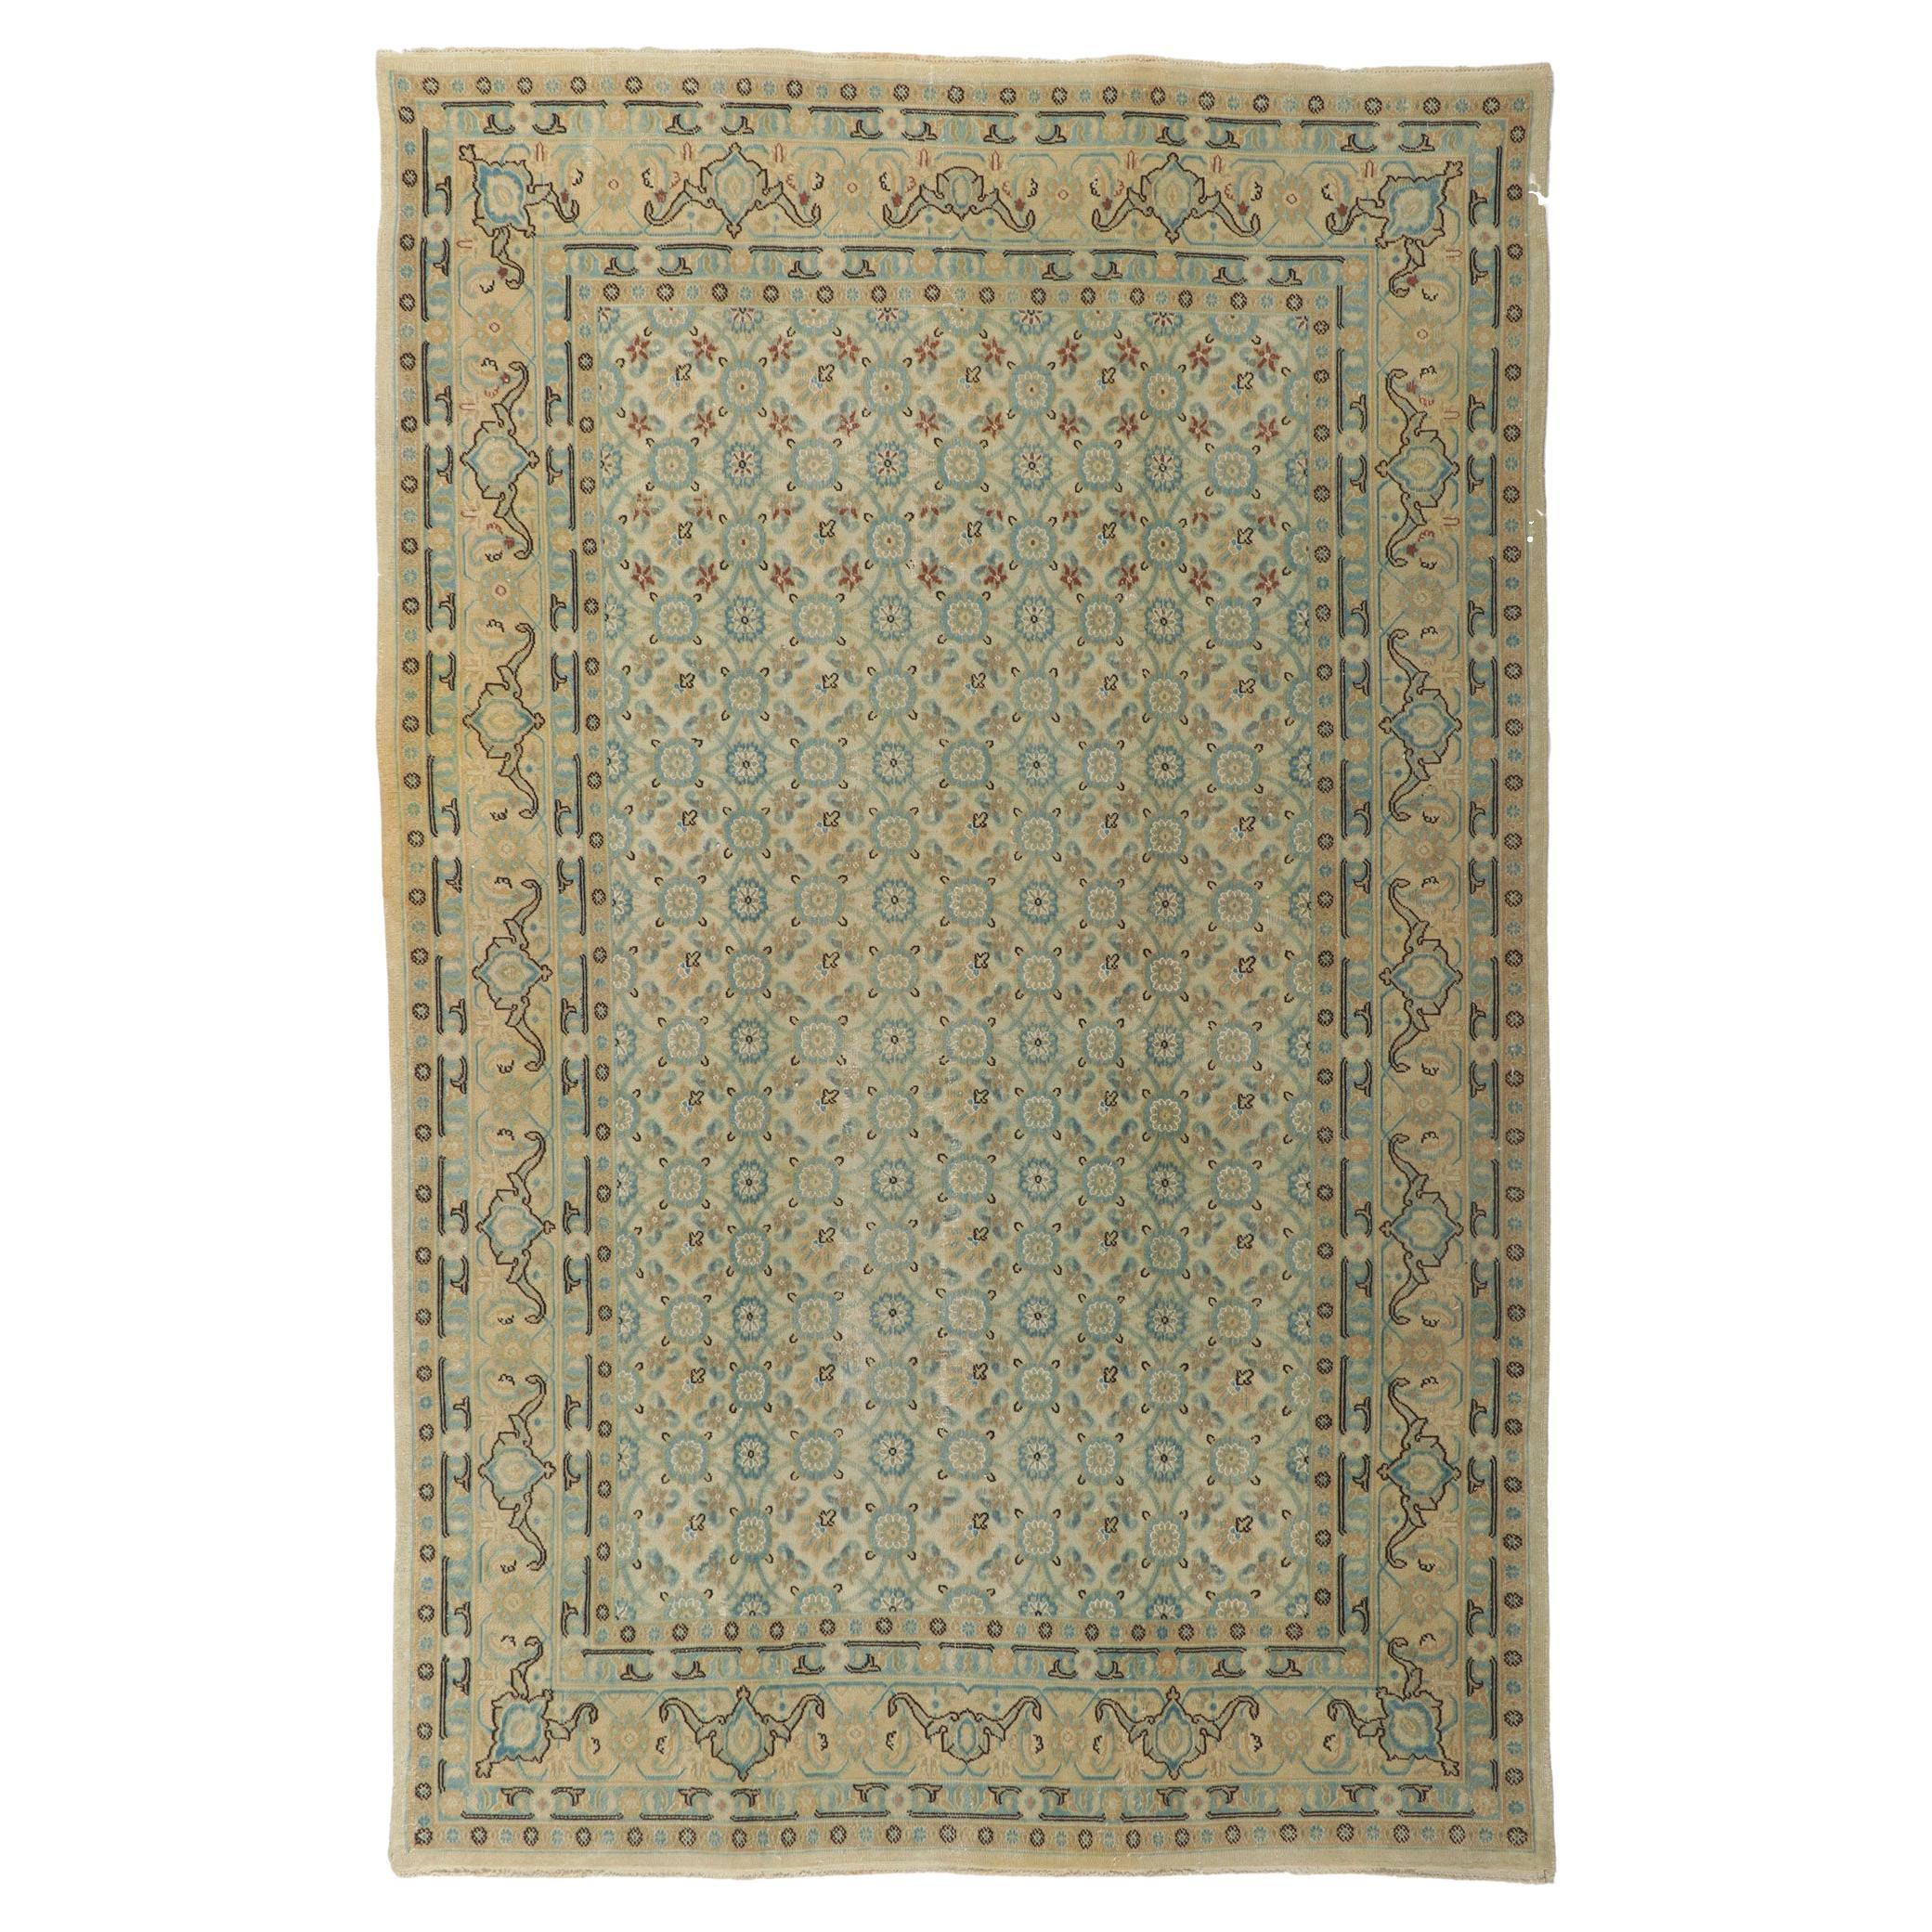 Antique Persian Mashhad Rug with Soft, Light Colors